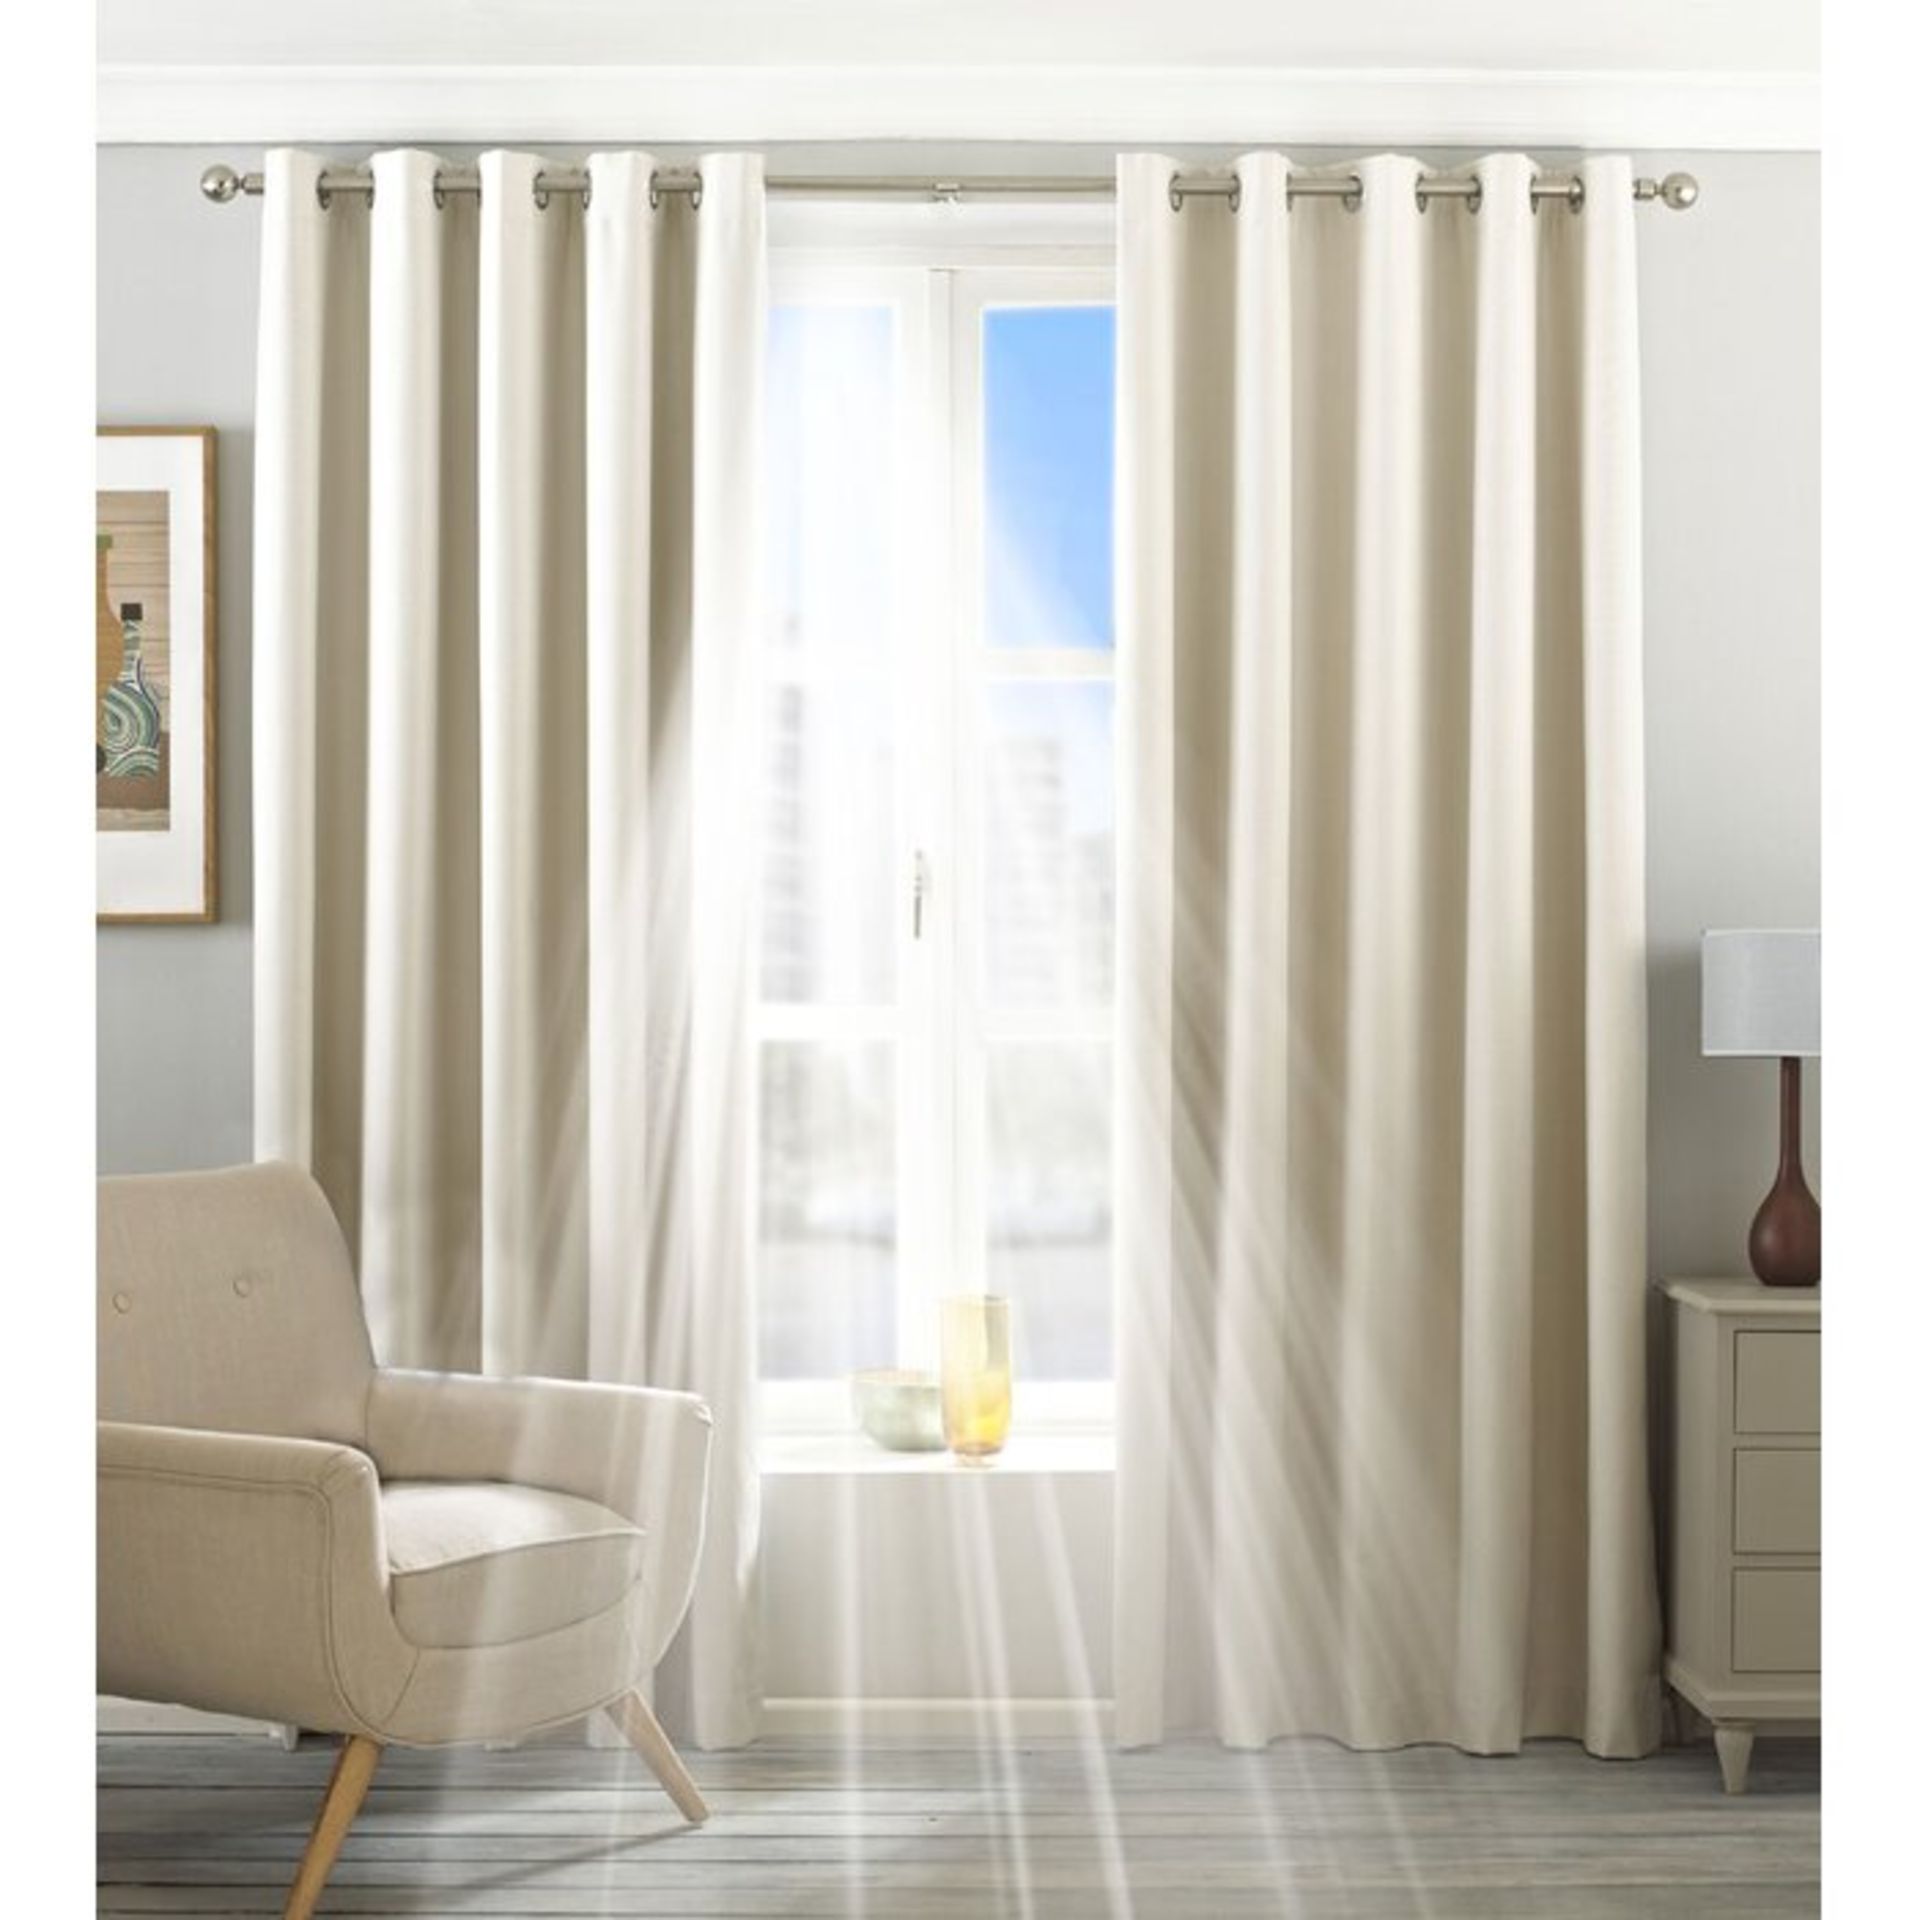 Eclipse Eyelet Blackout Thermal Curtains (Set of 2) - RRP £49.99